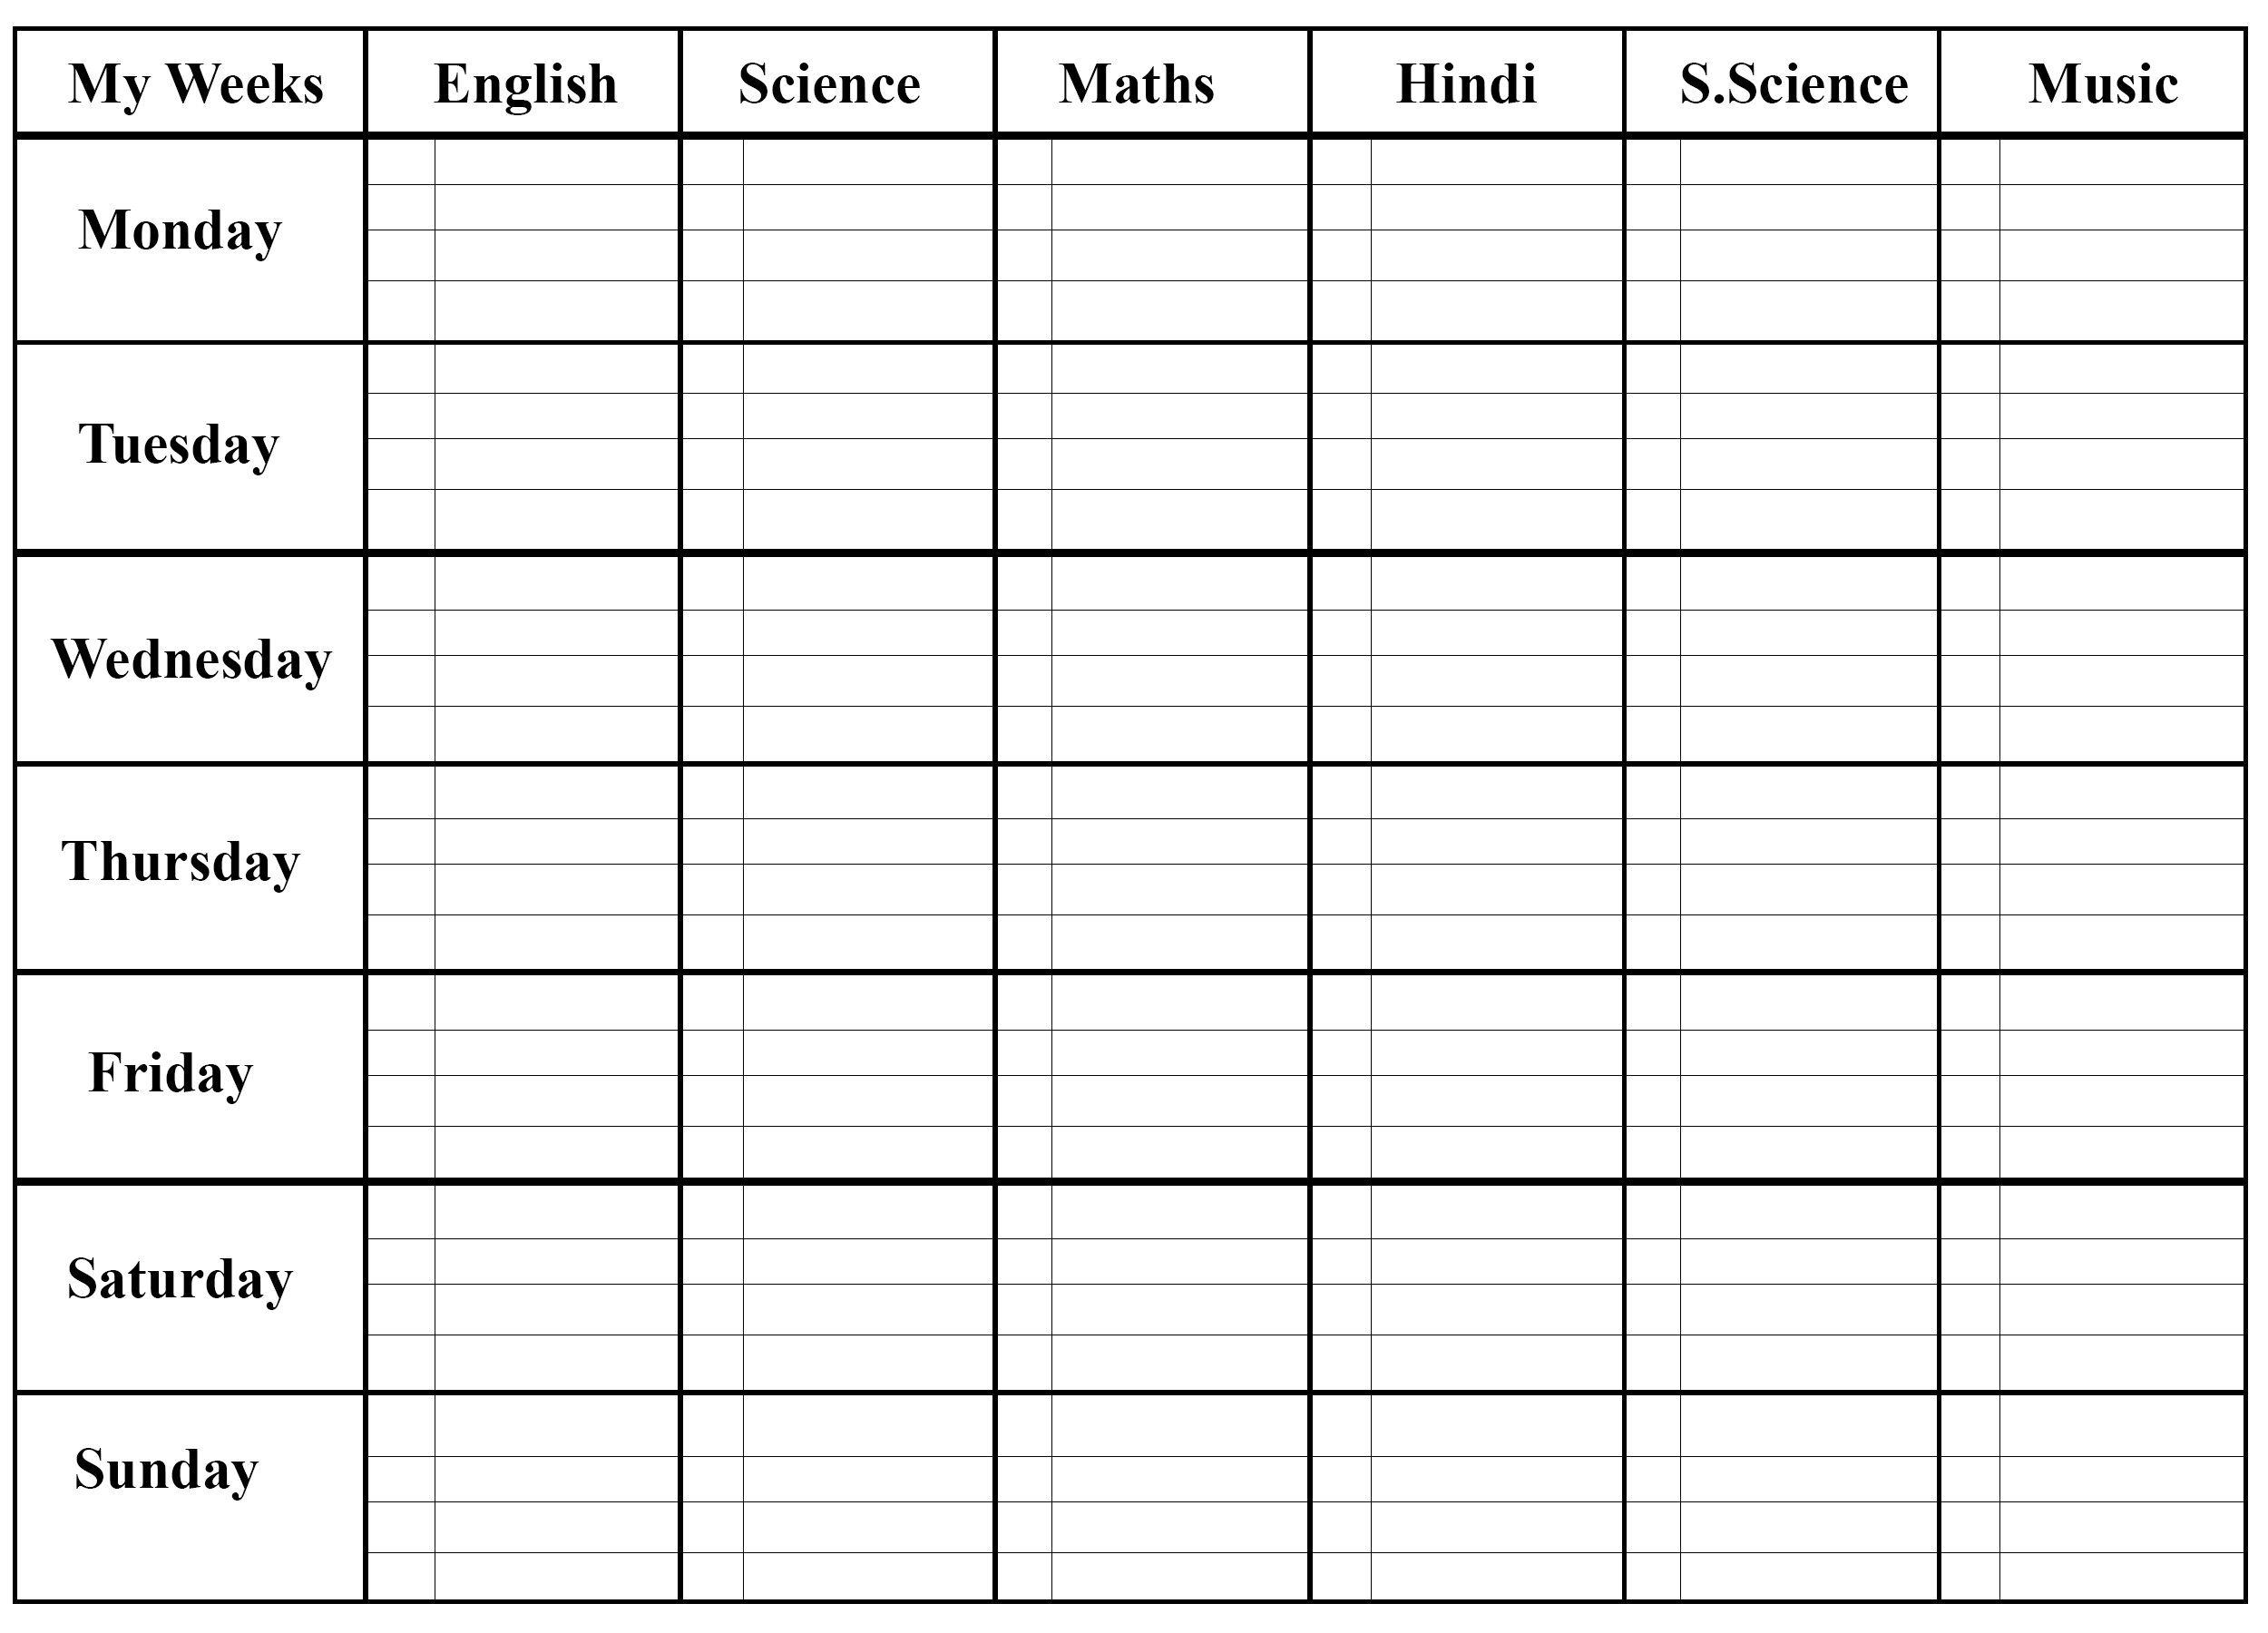 Weekly Class Schedule Template For Elementary School